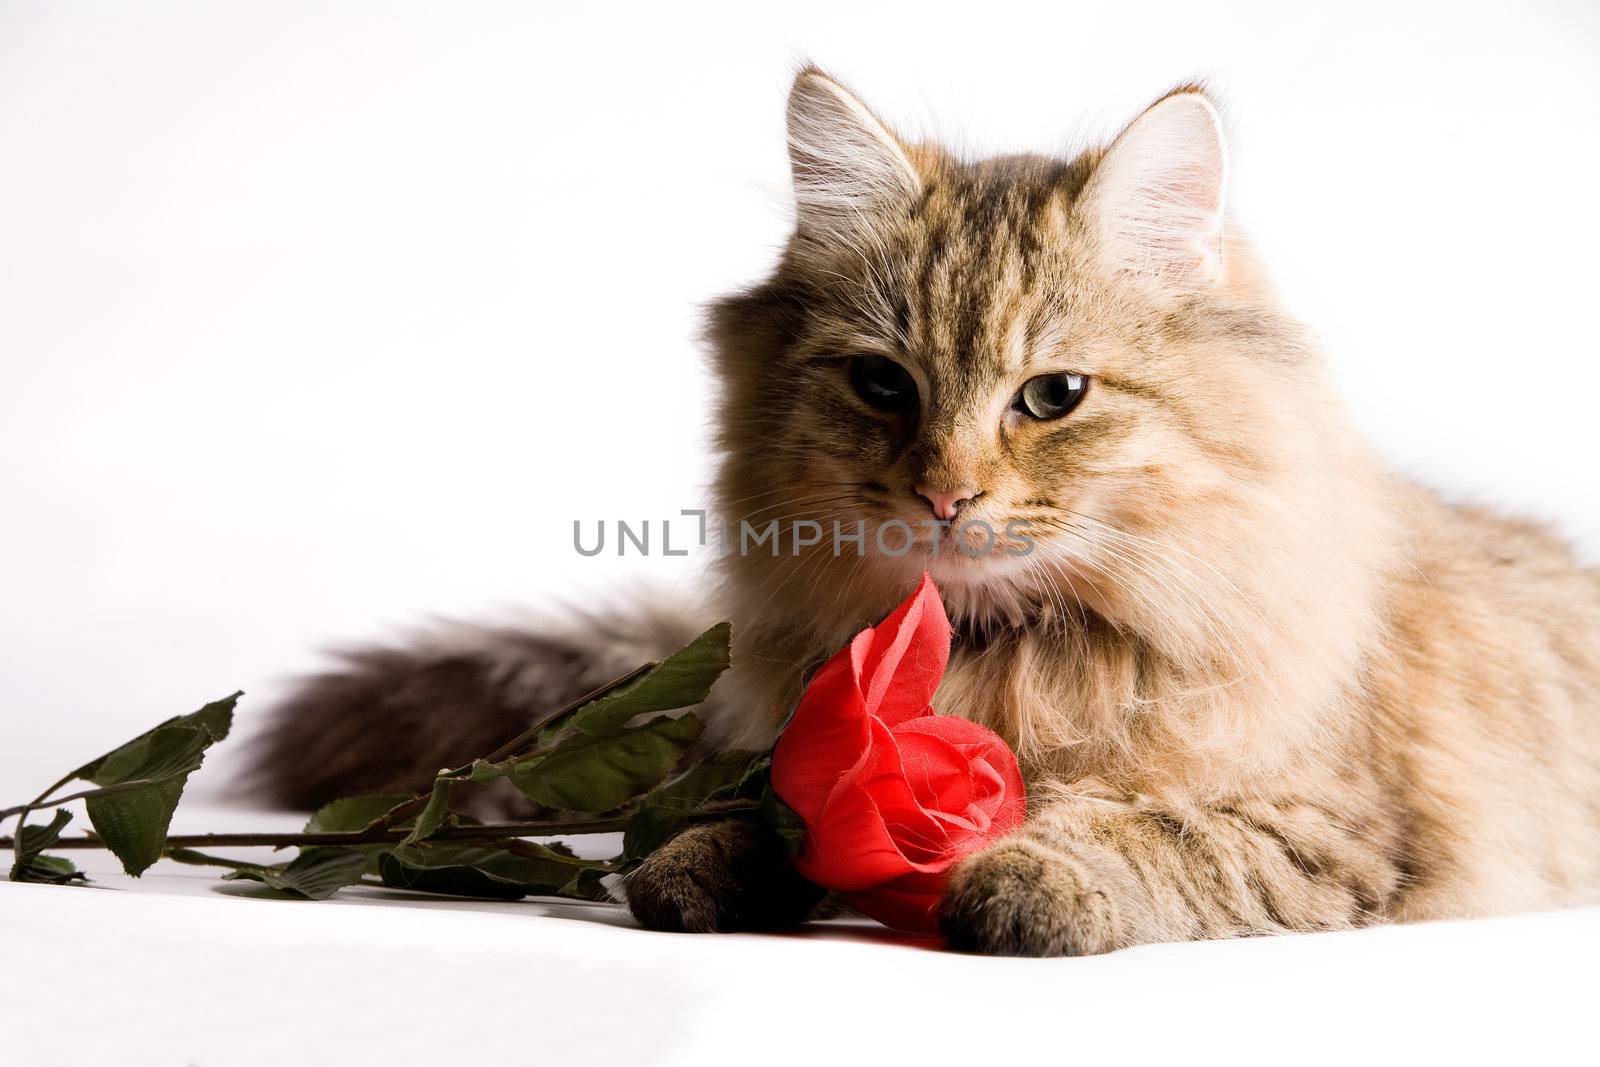 Sweet little cat with a red rose for valentines day.